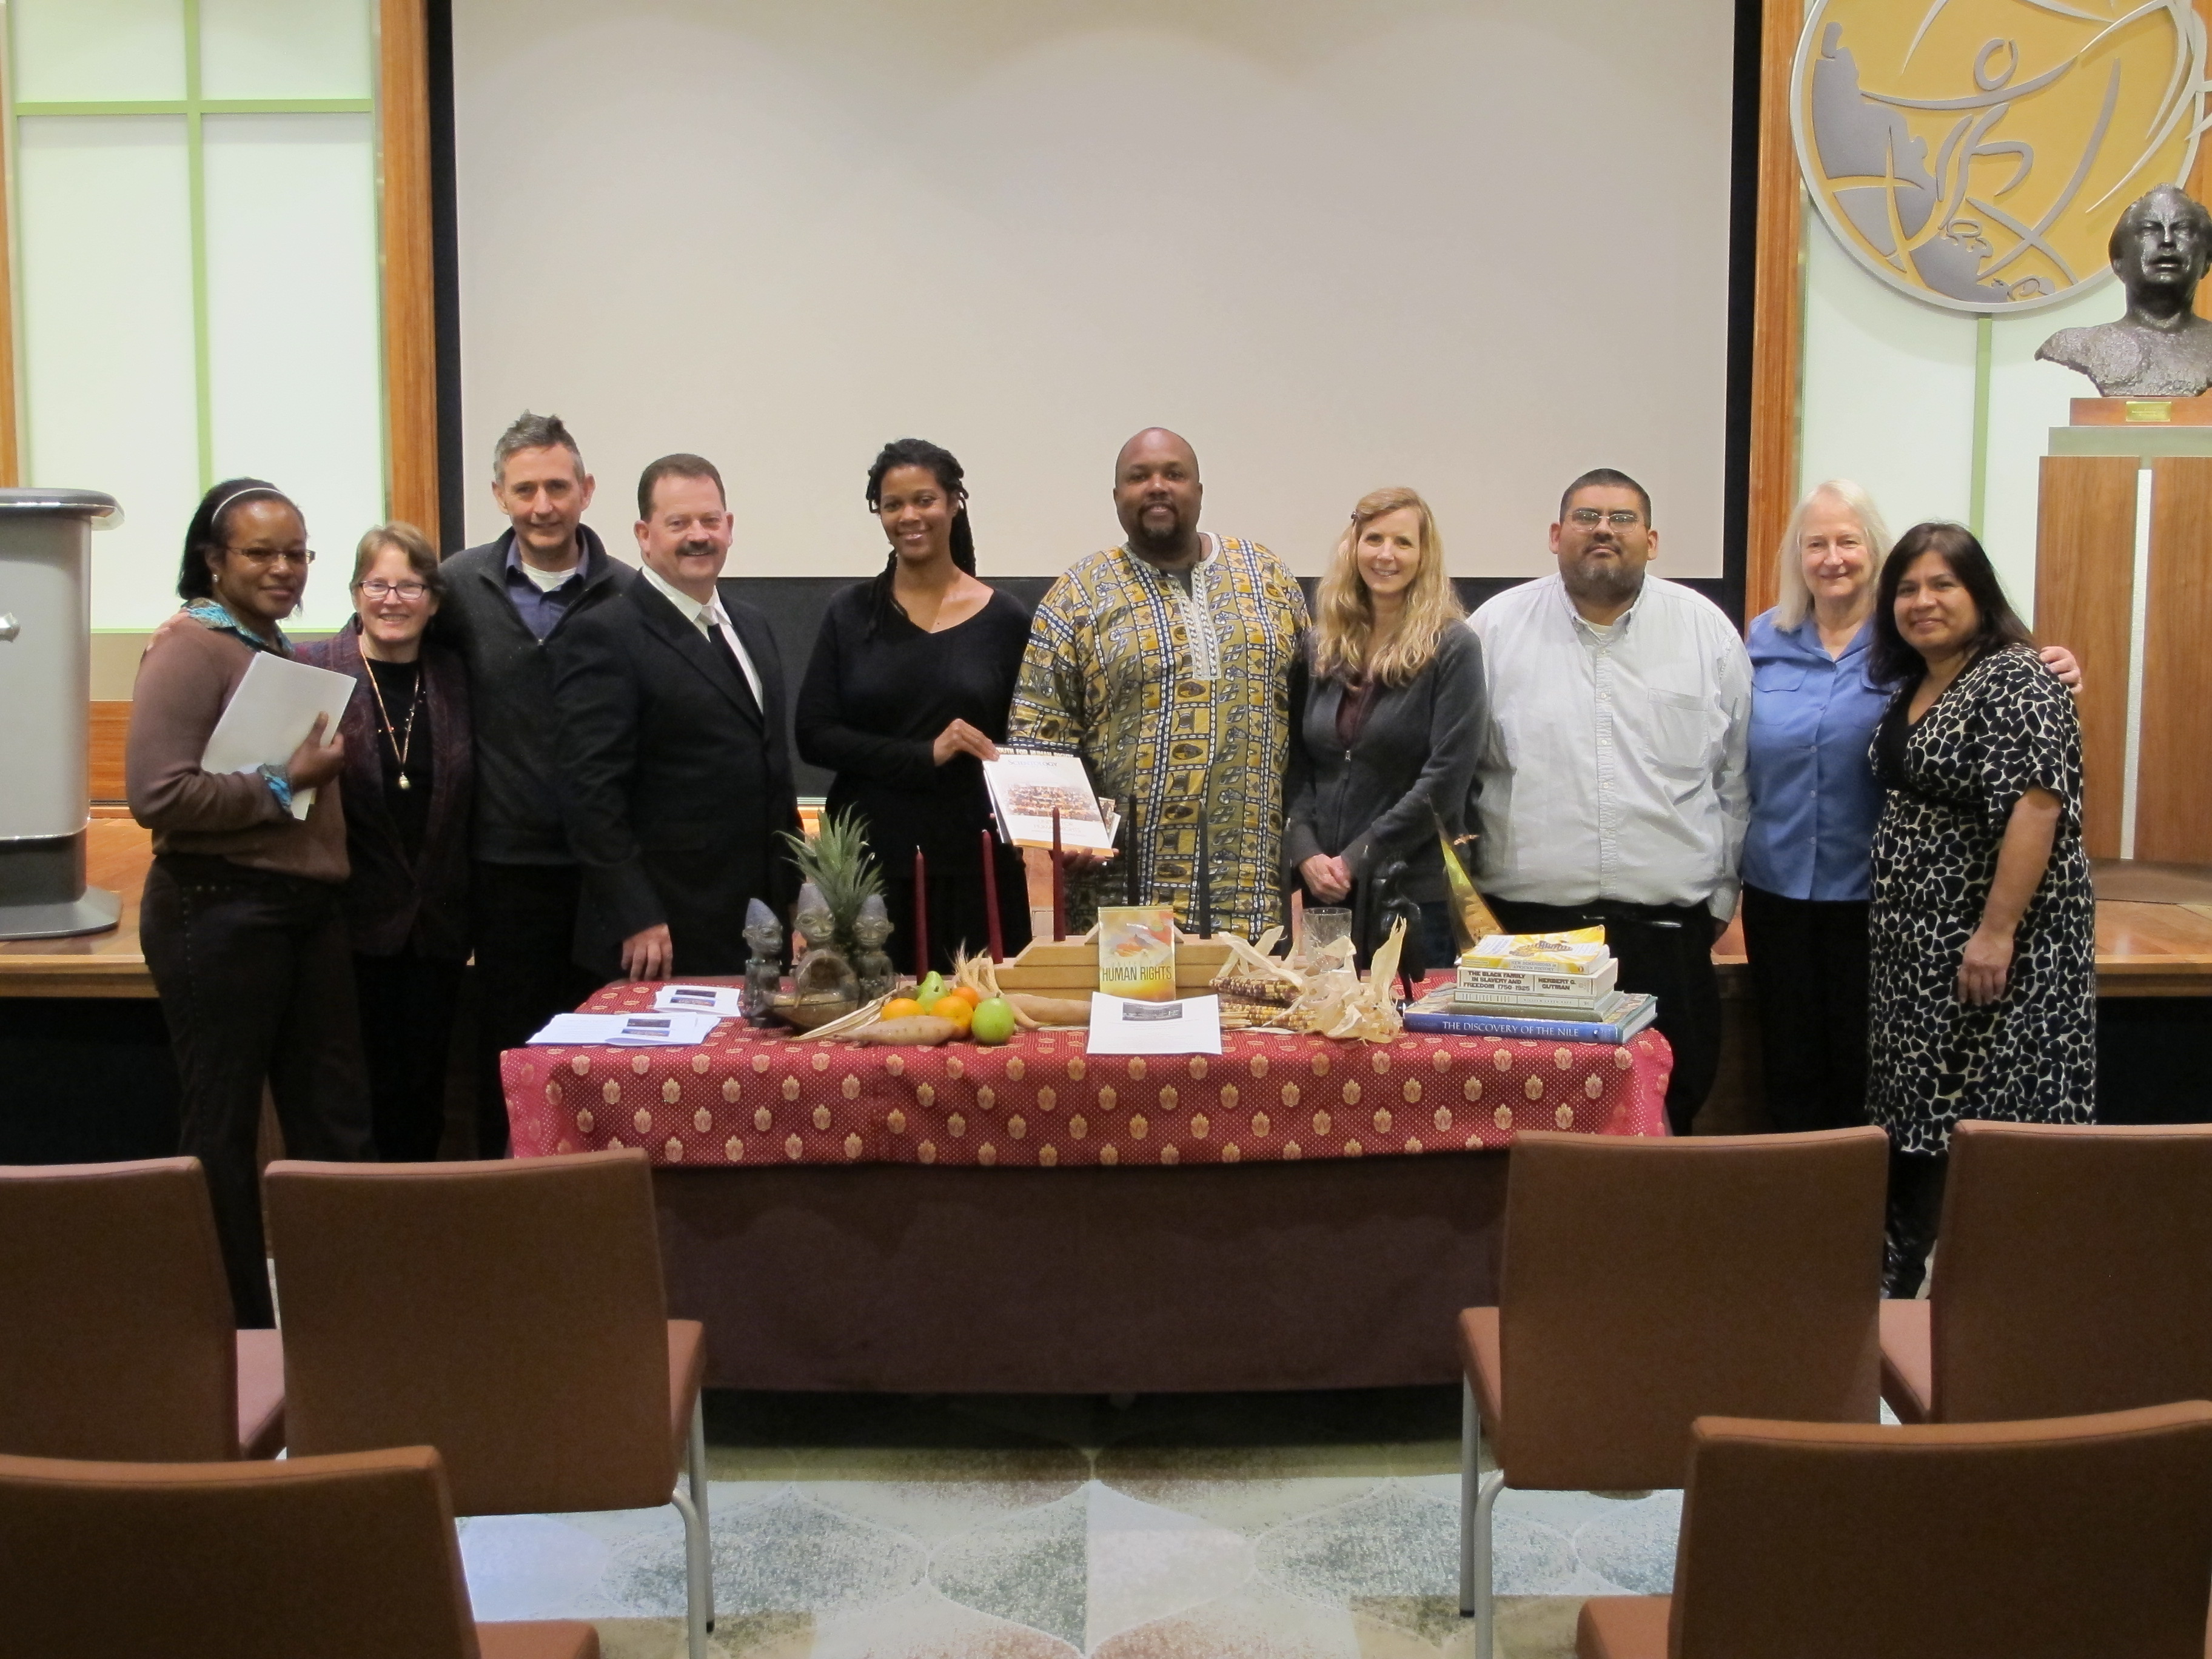 Some of the attendees at Sacramento's Church of Scientology's Kwanzaa celebration.